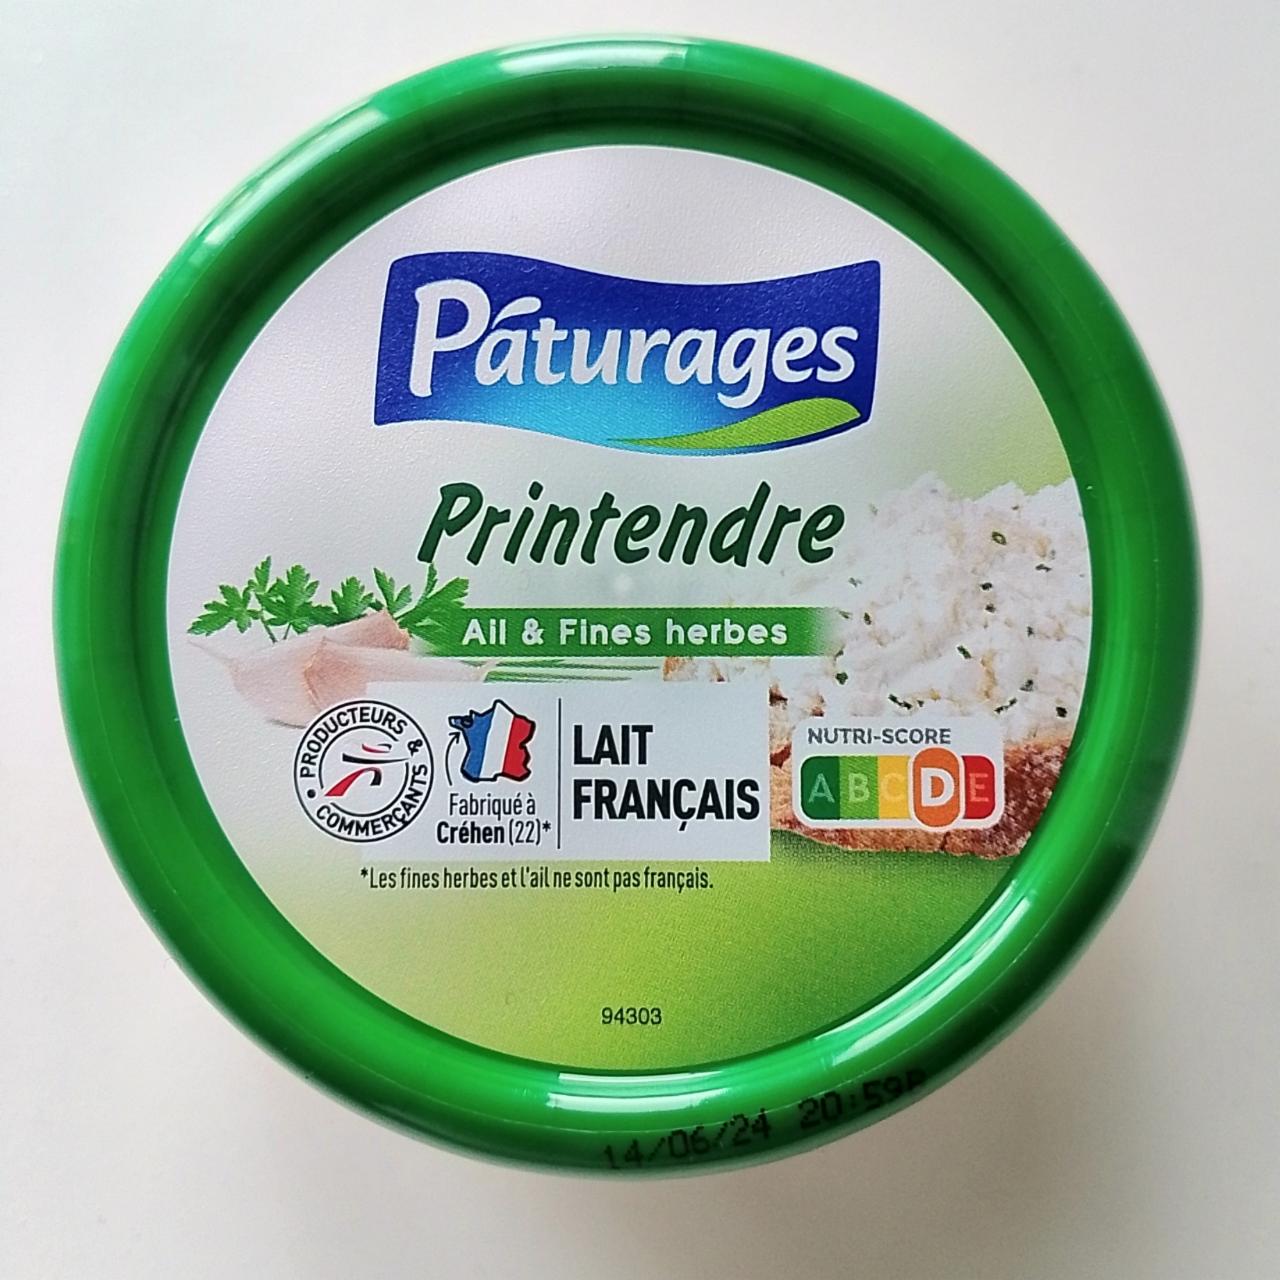 Фото - Сырная намазка Printendre All&Fines herbes Paturages